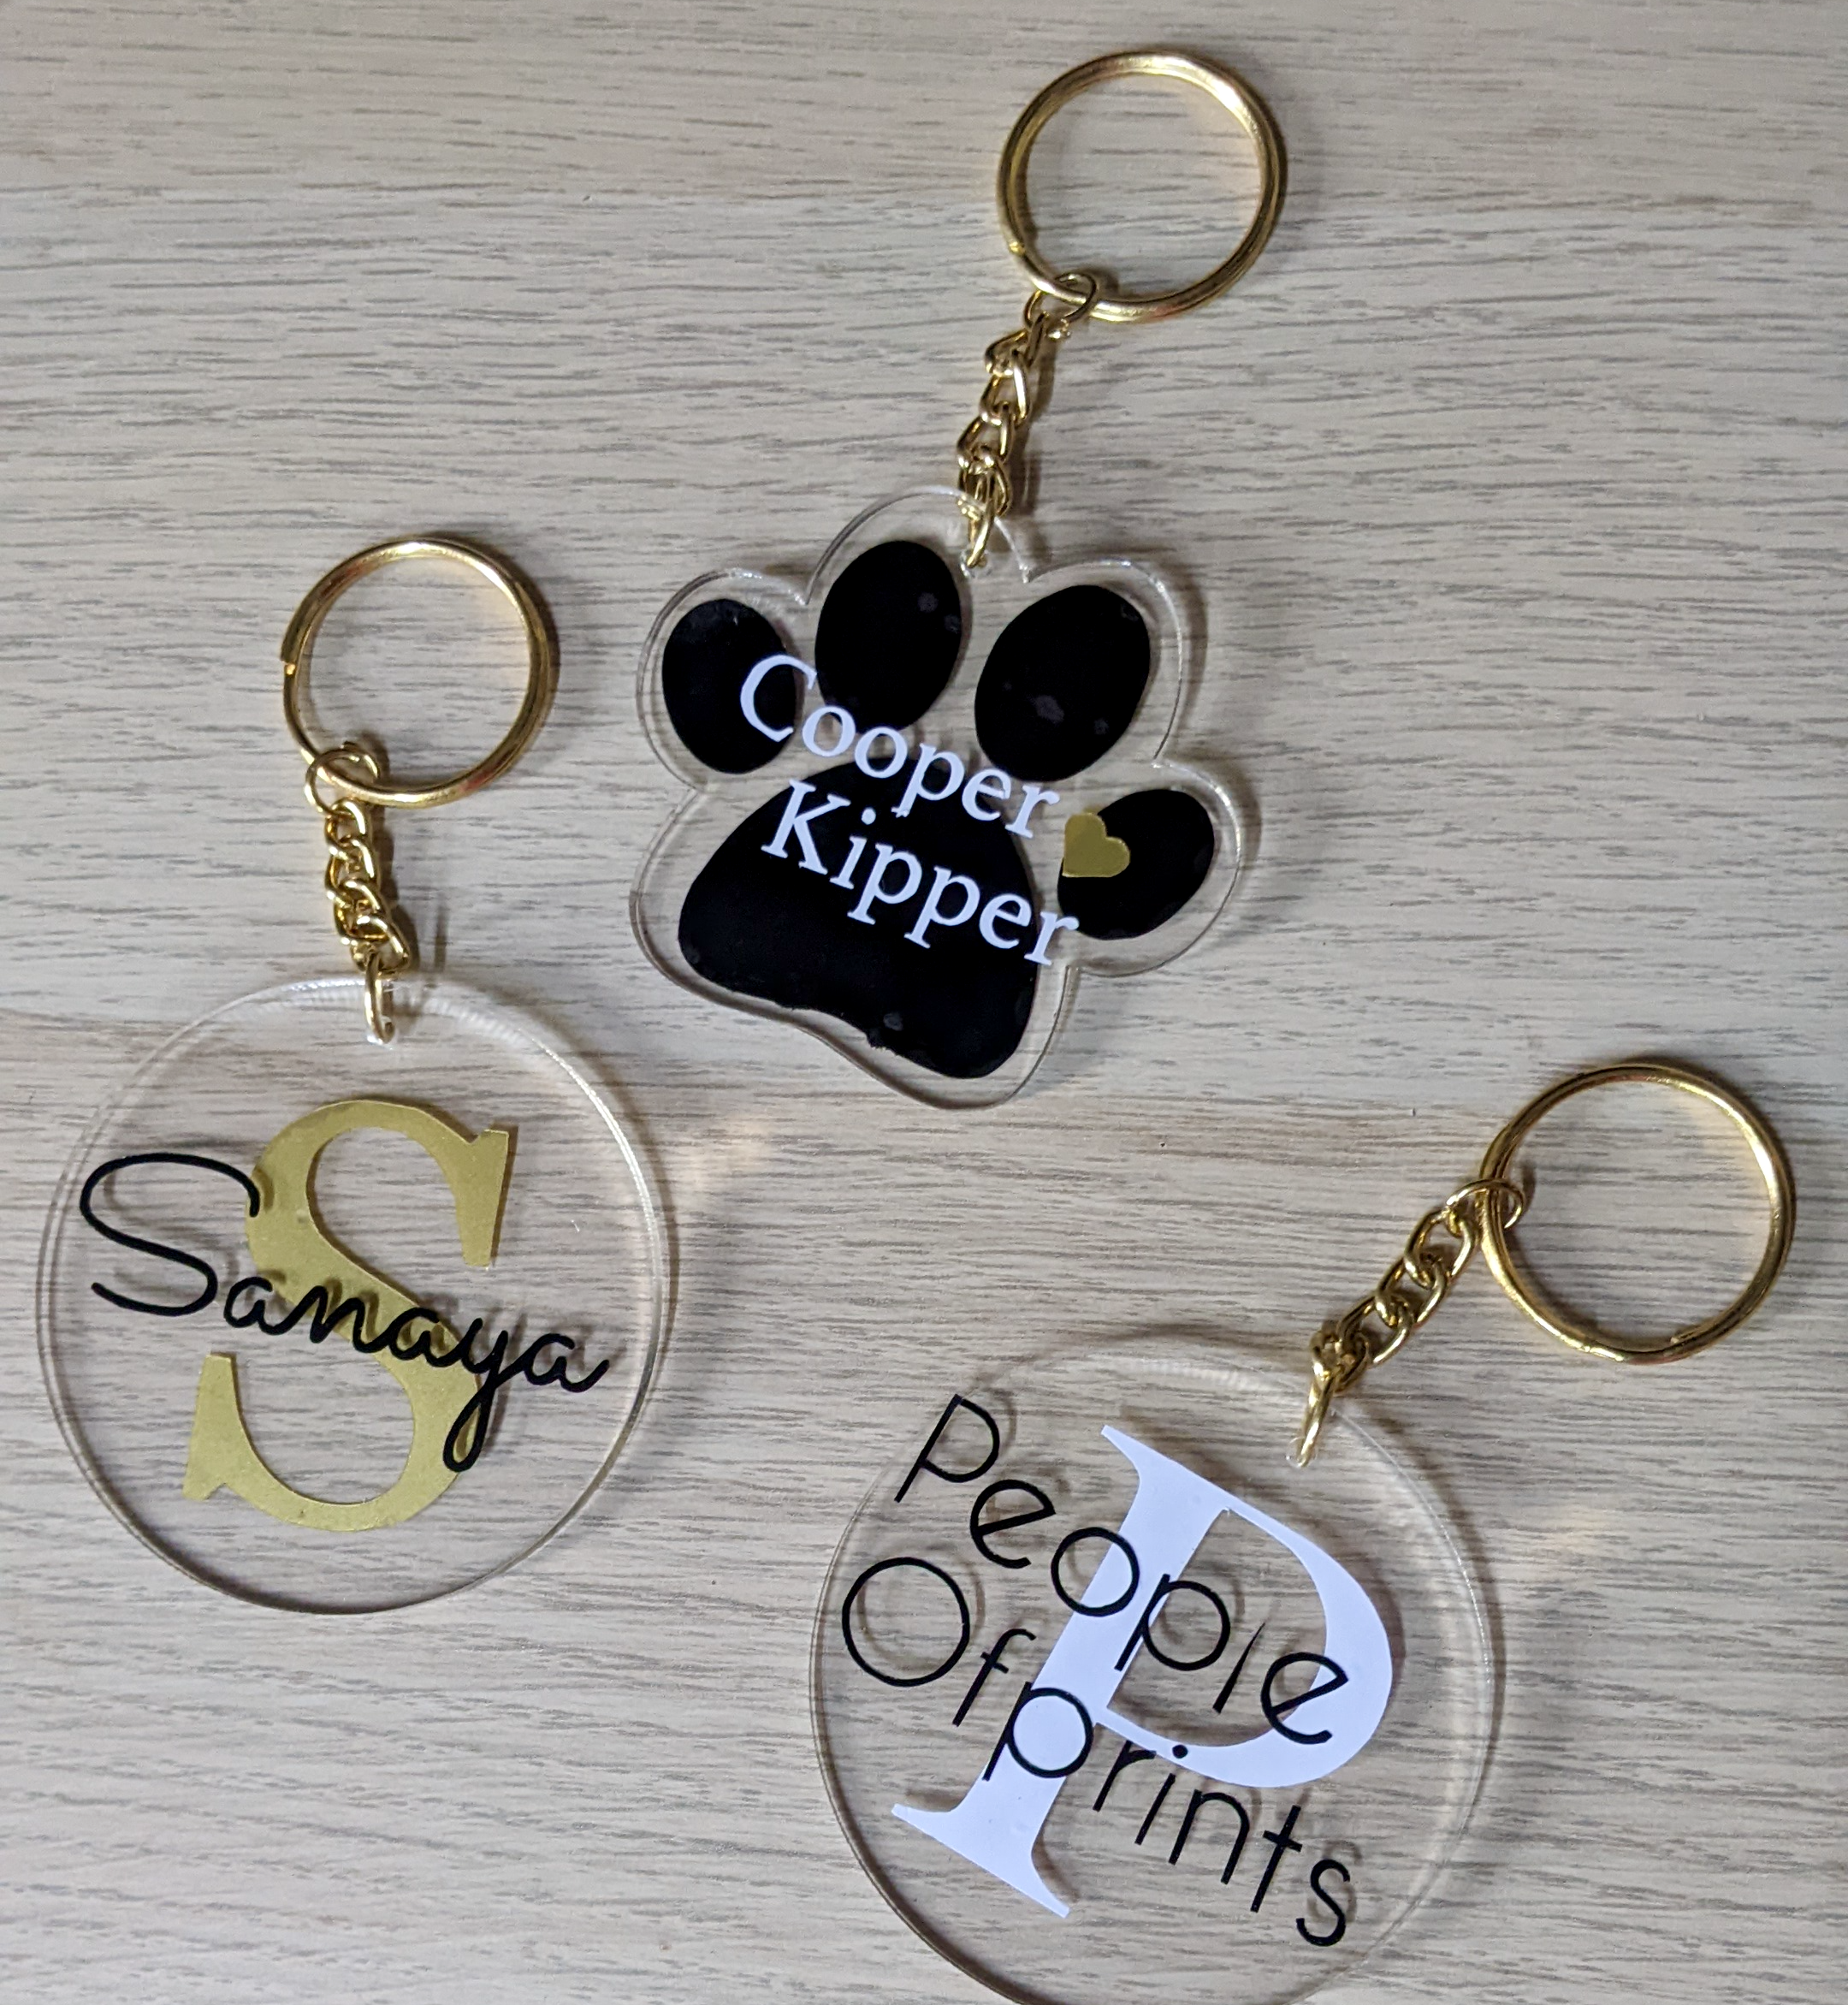 personalised keychain with name printed